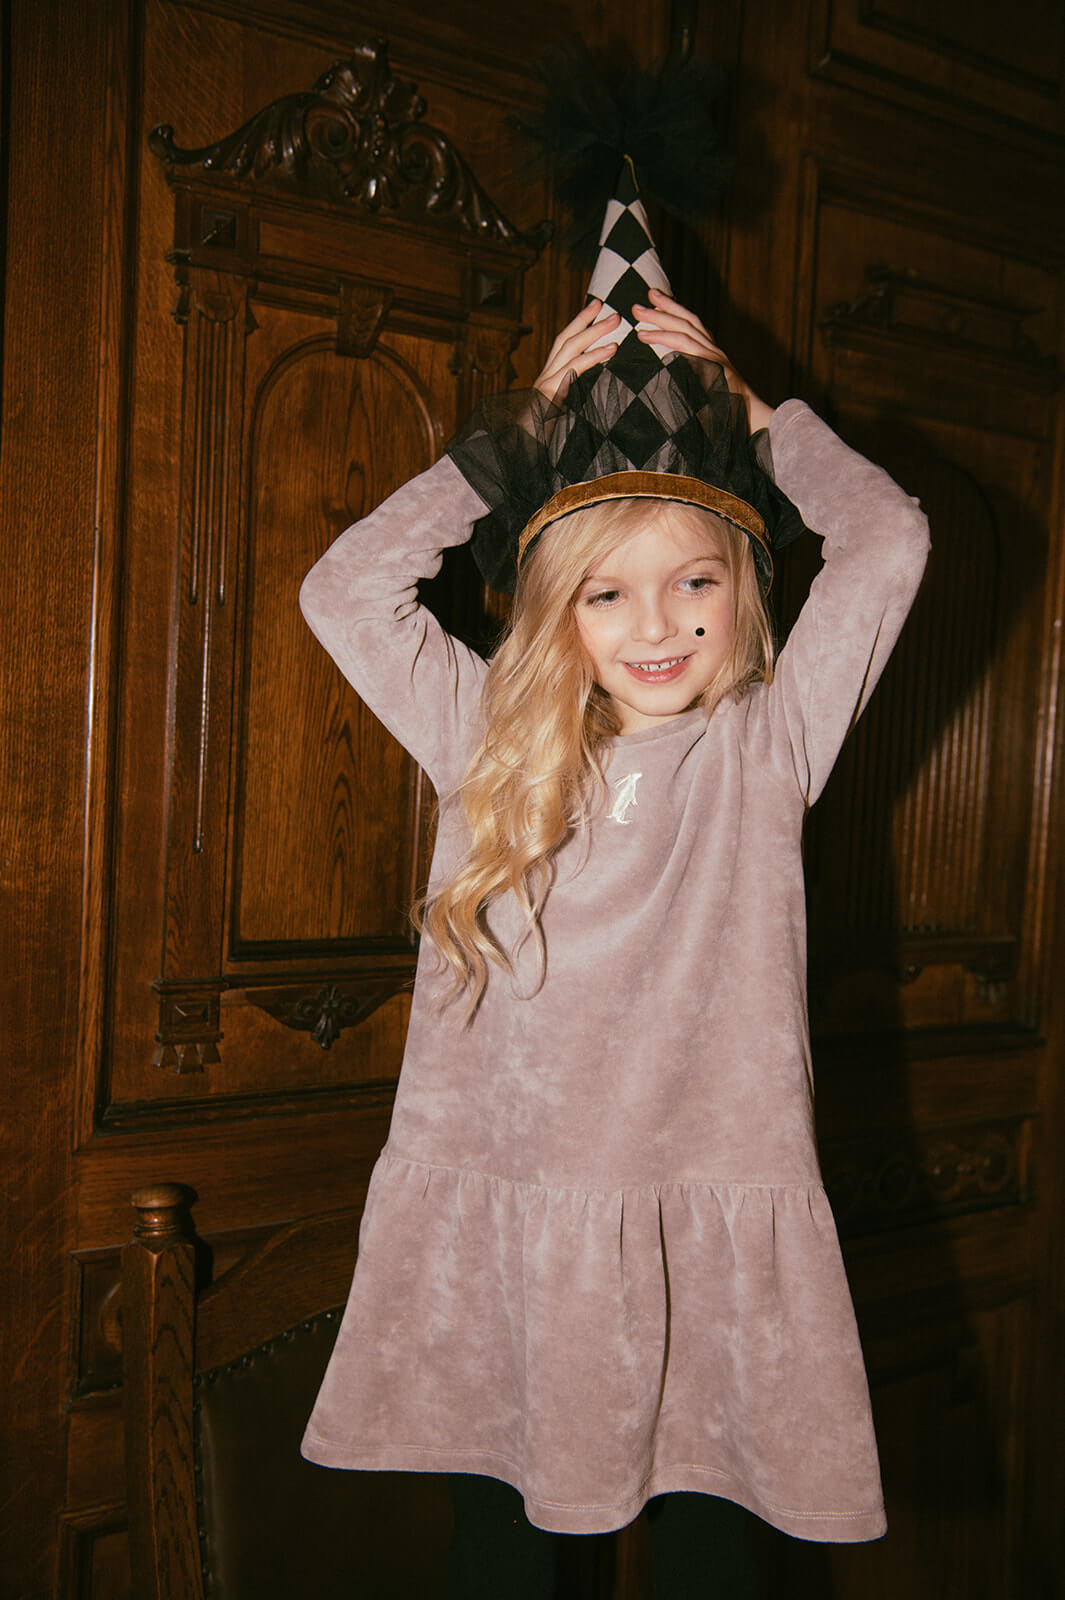 Looking for a dress that your little girl will love? Check out this light velvet grey dress with a bit of shine. It's not only stylish but also soft and comfortable to wear, shop online in Hong Kong. Perfect for all upcoming parties, travels or daily wear, this dress also features a cute bunny embroidery on the front.